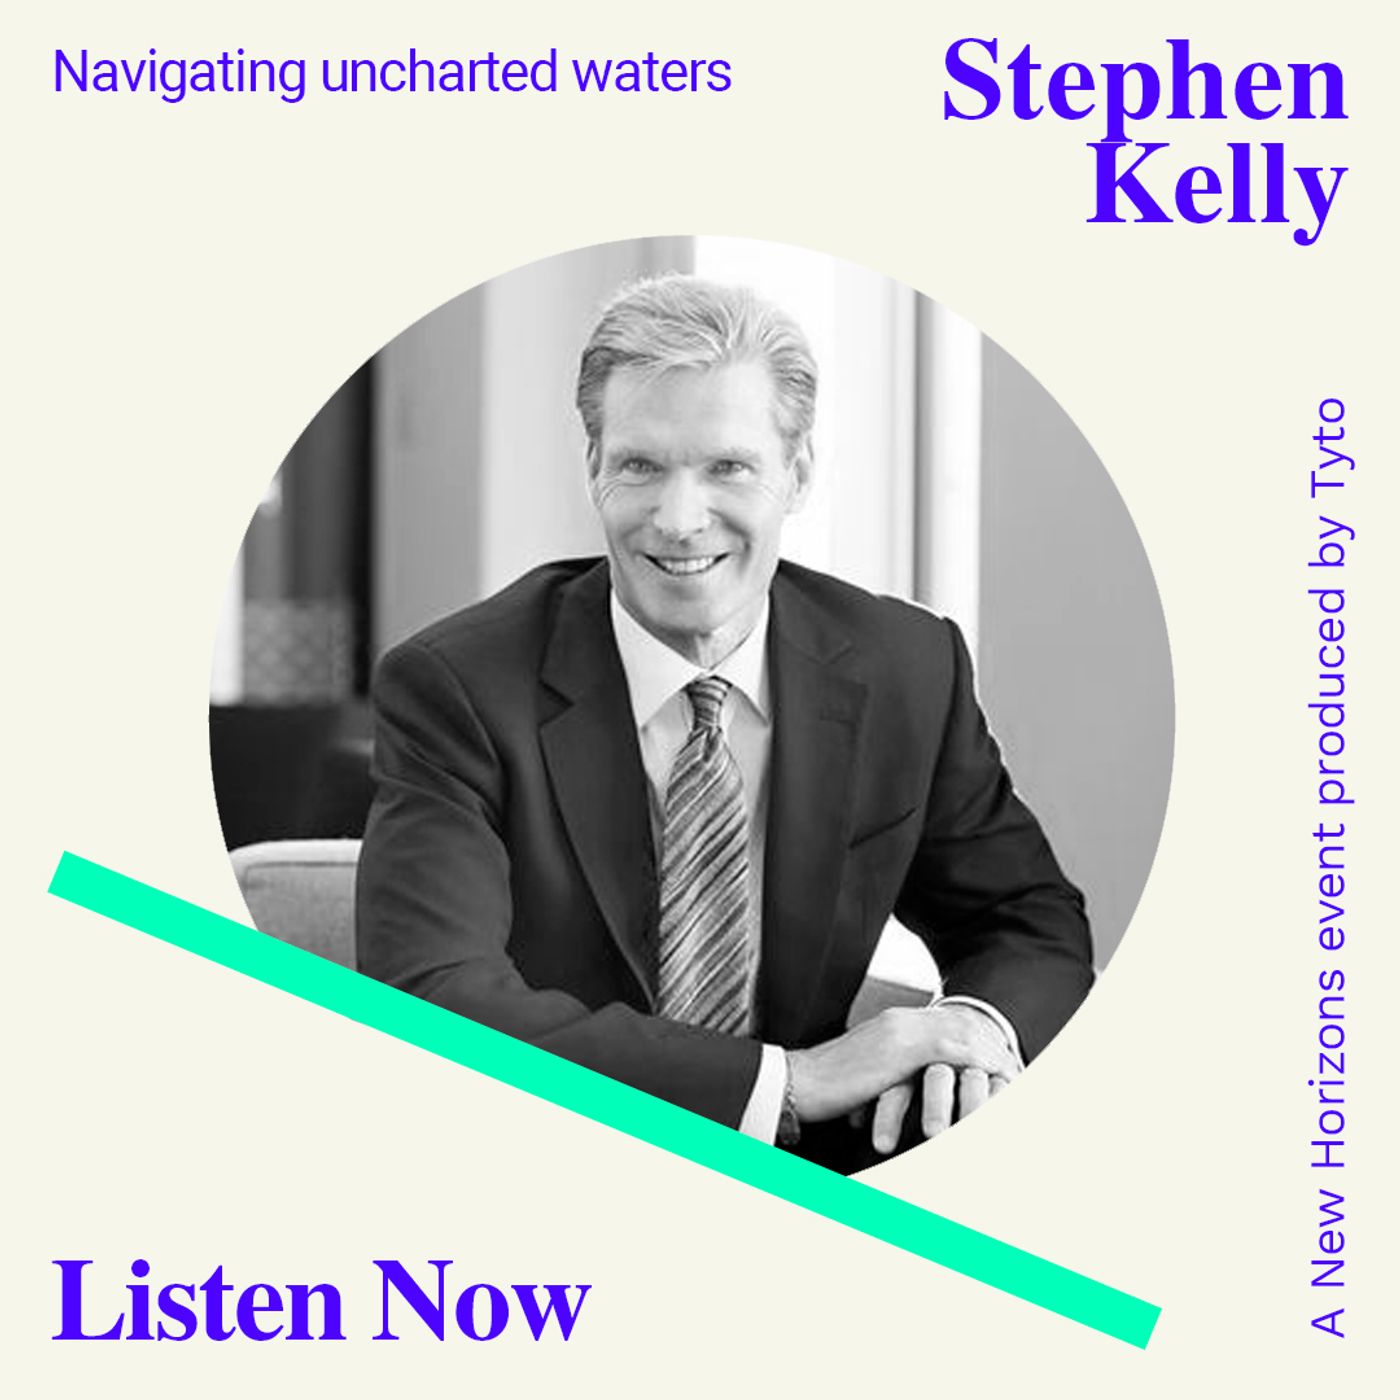 S2 Ep5: Stephen Kelly - Navigating Uncharted Waters - New Horizons Special 03